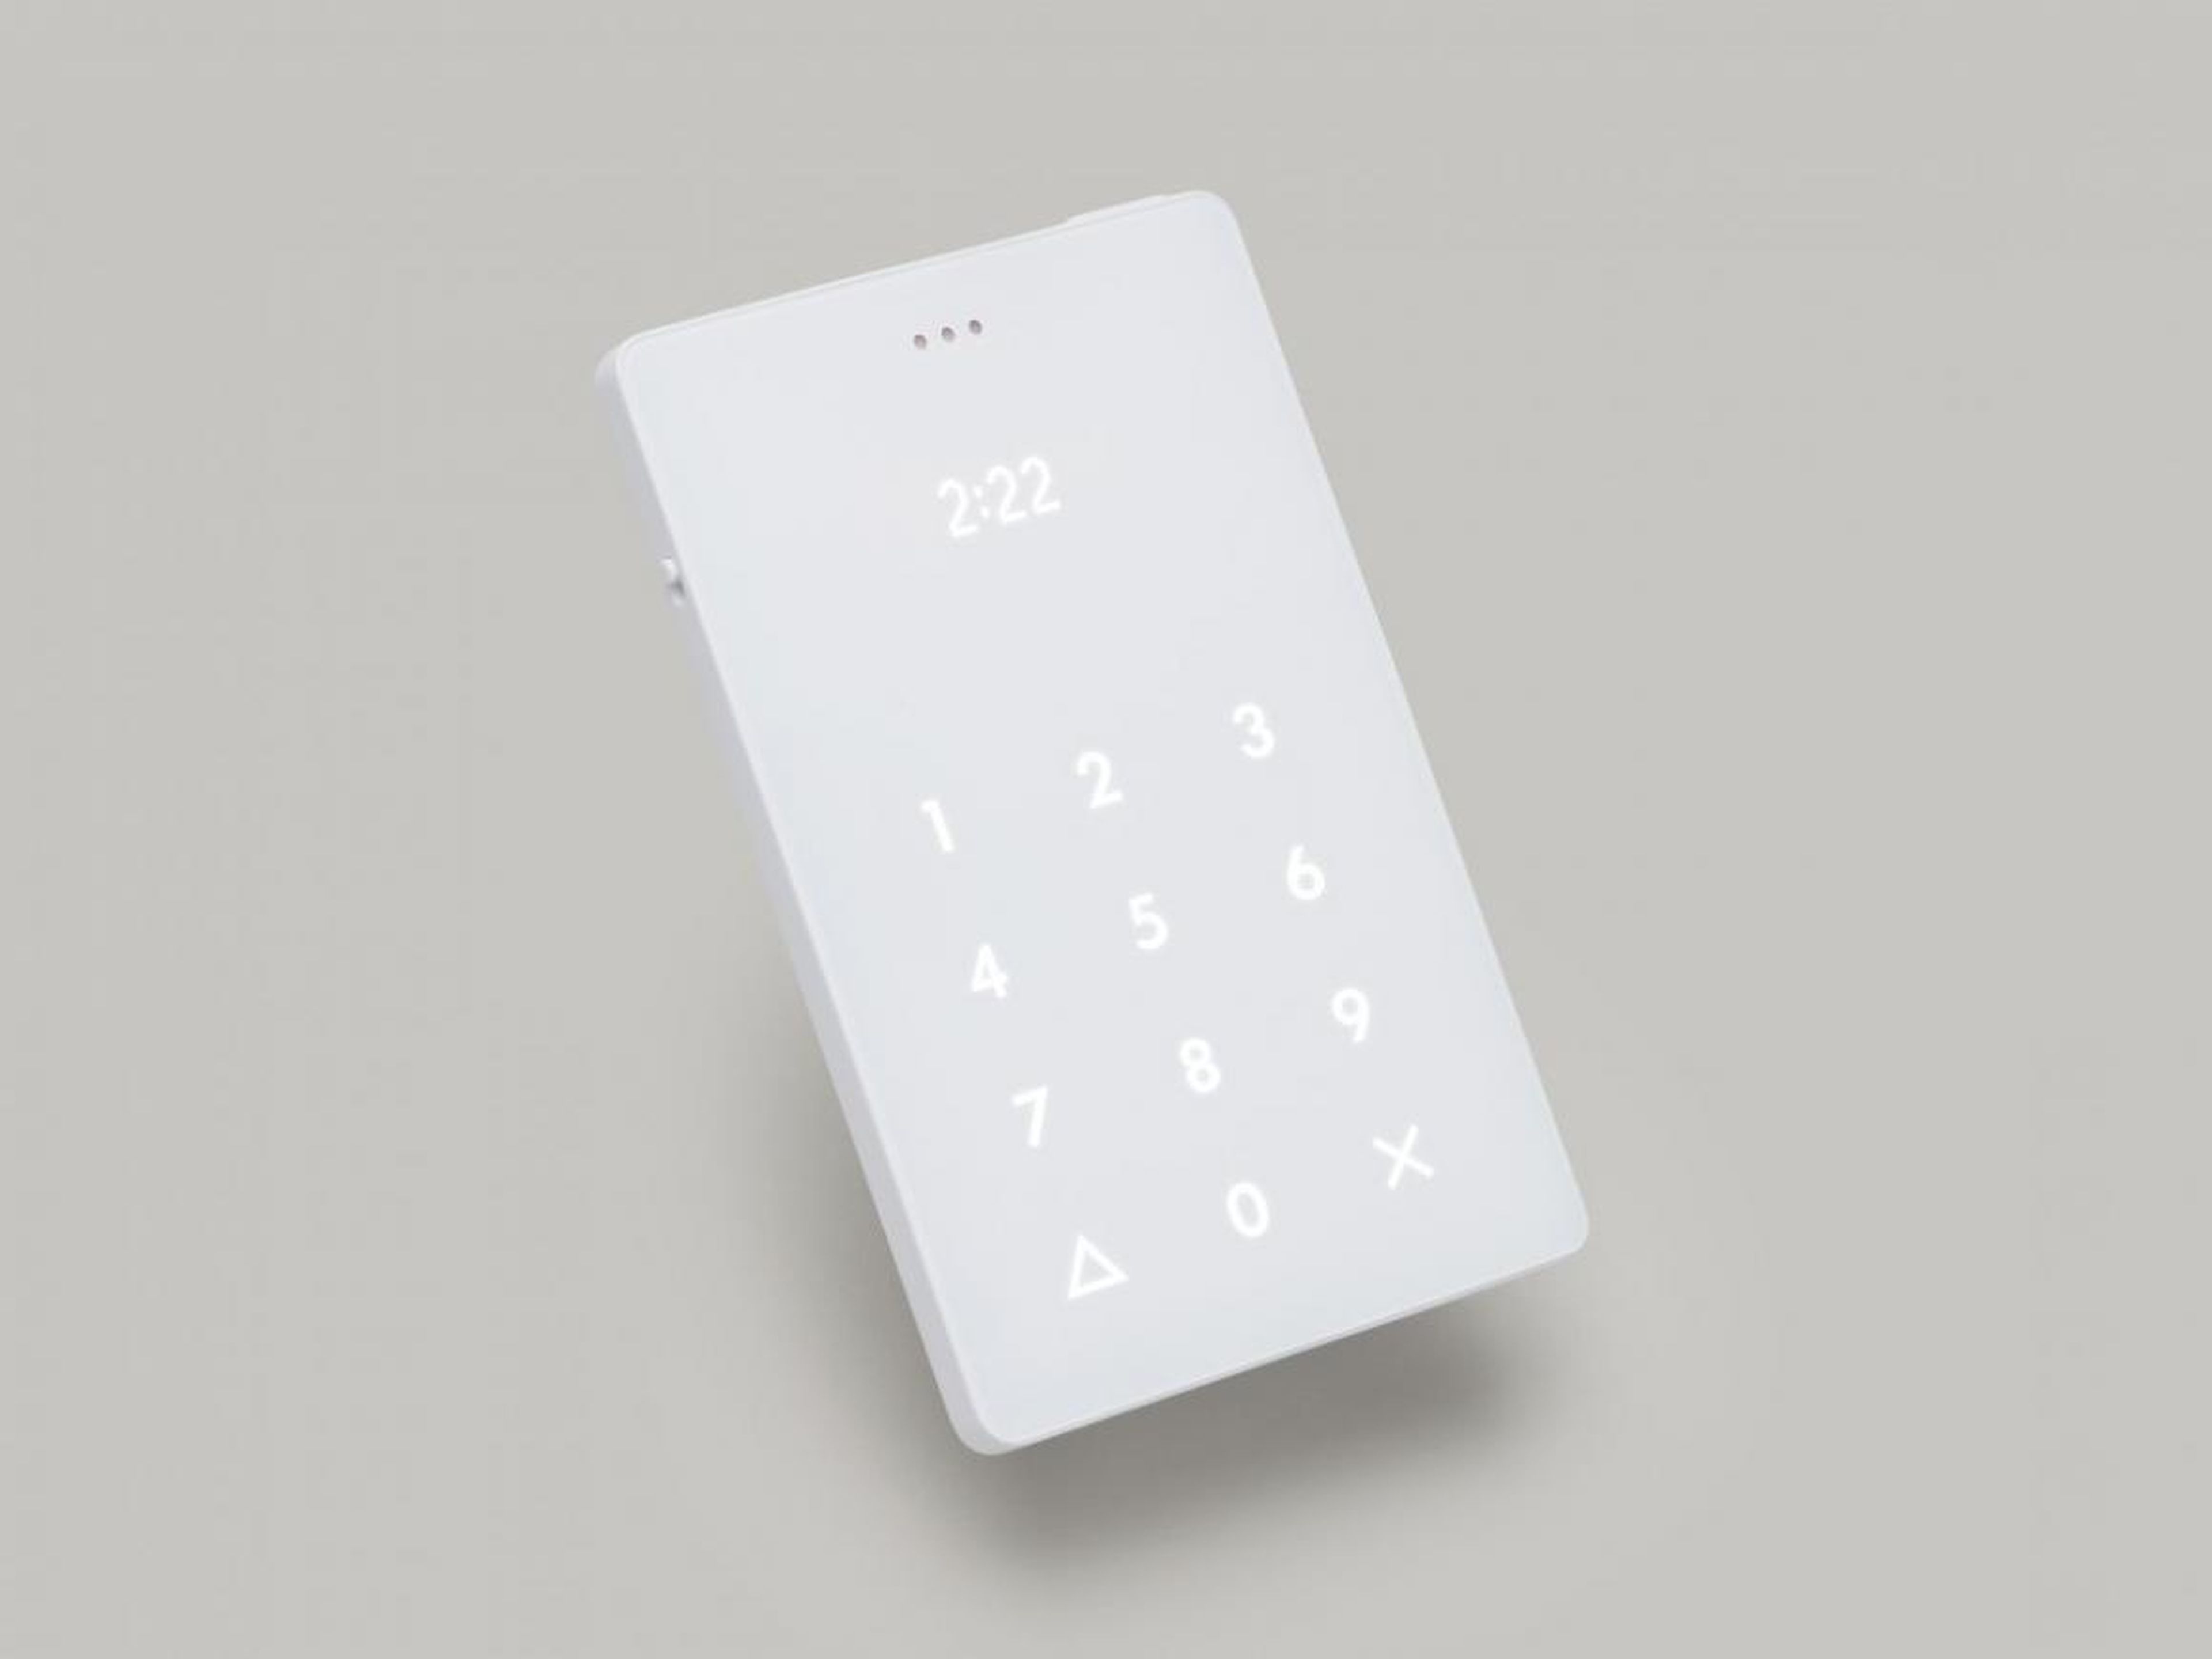 Light launched its first product, the Light Phone, on Kickstarter in June 2015. Light raised over $400,000 from that campaign and had a 50,000-person waiting list for the phone. The original Light Phone was about the size of a